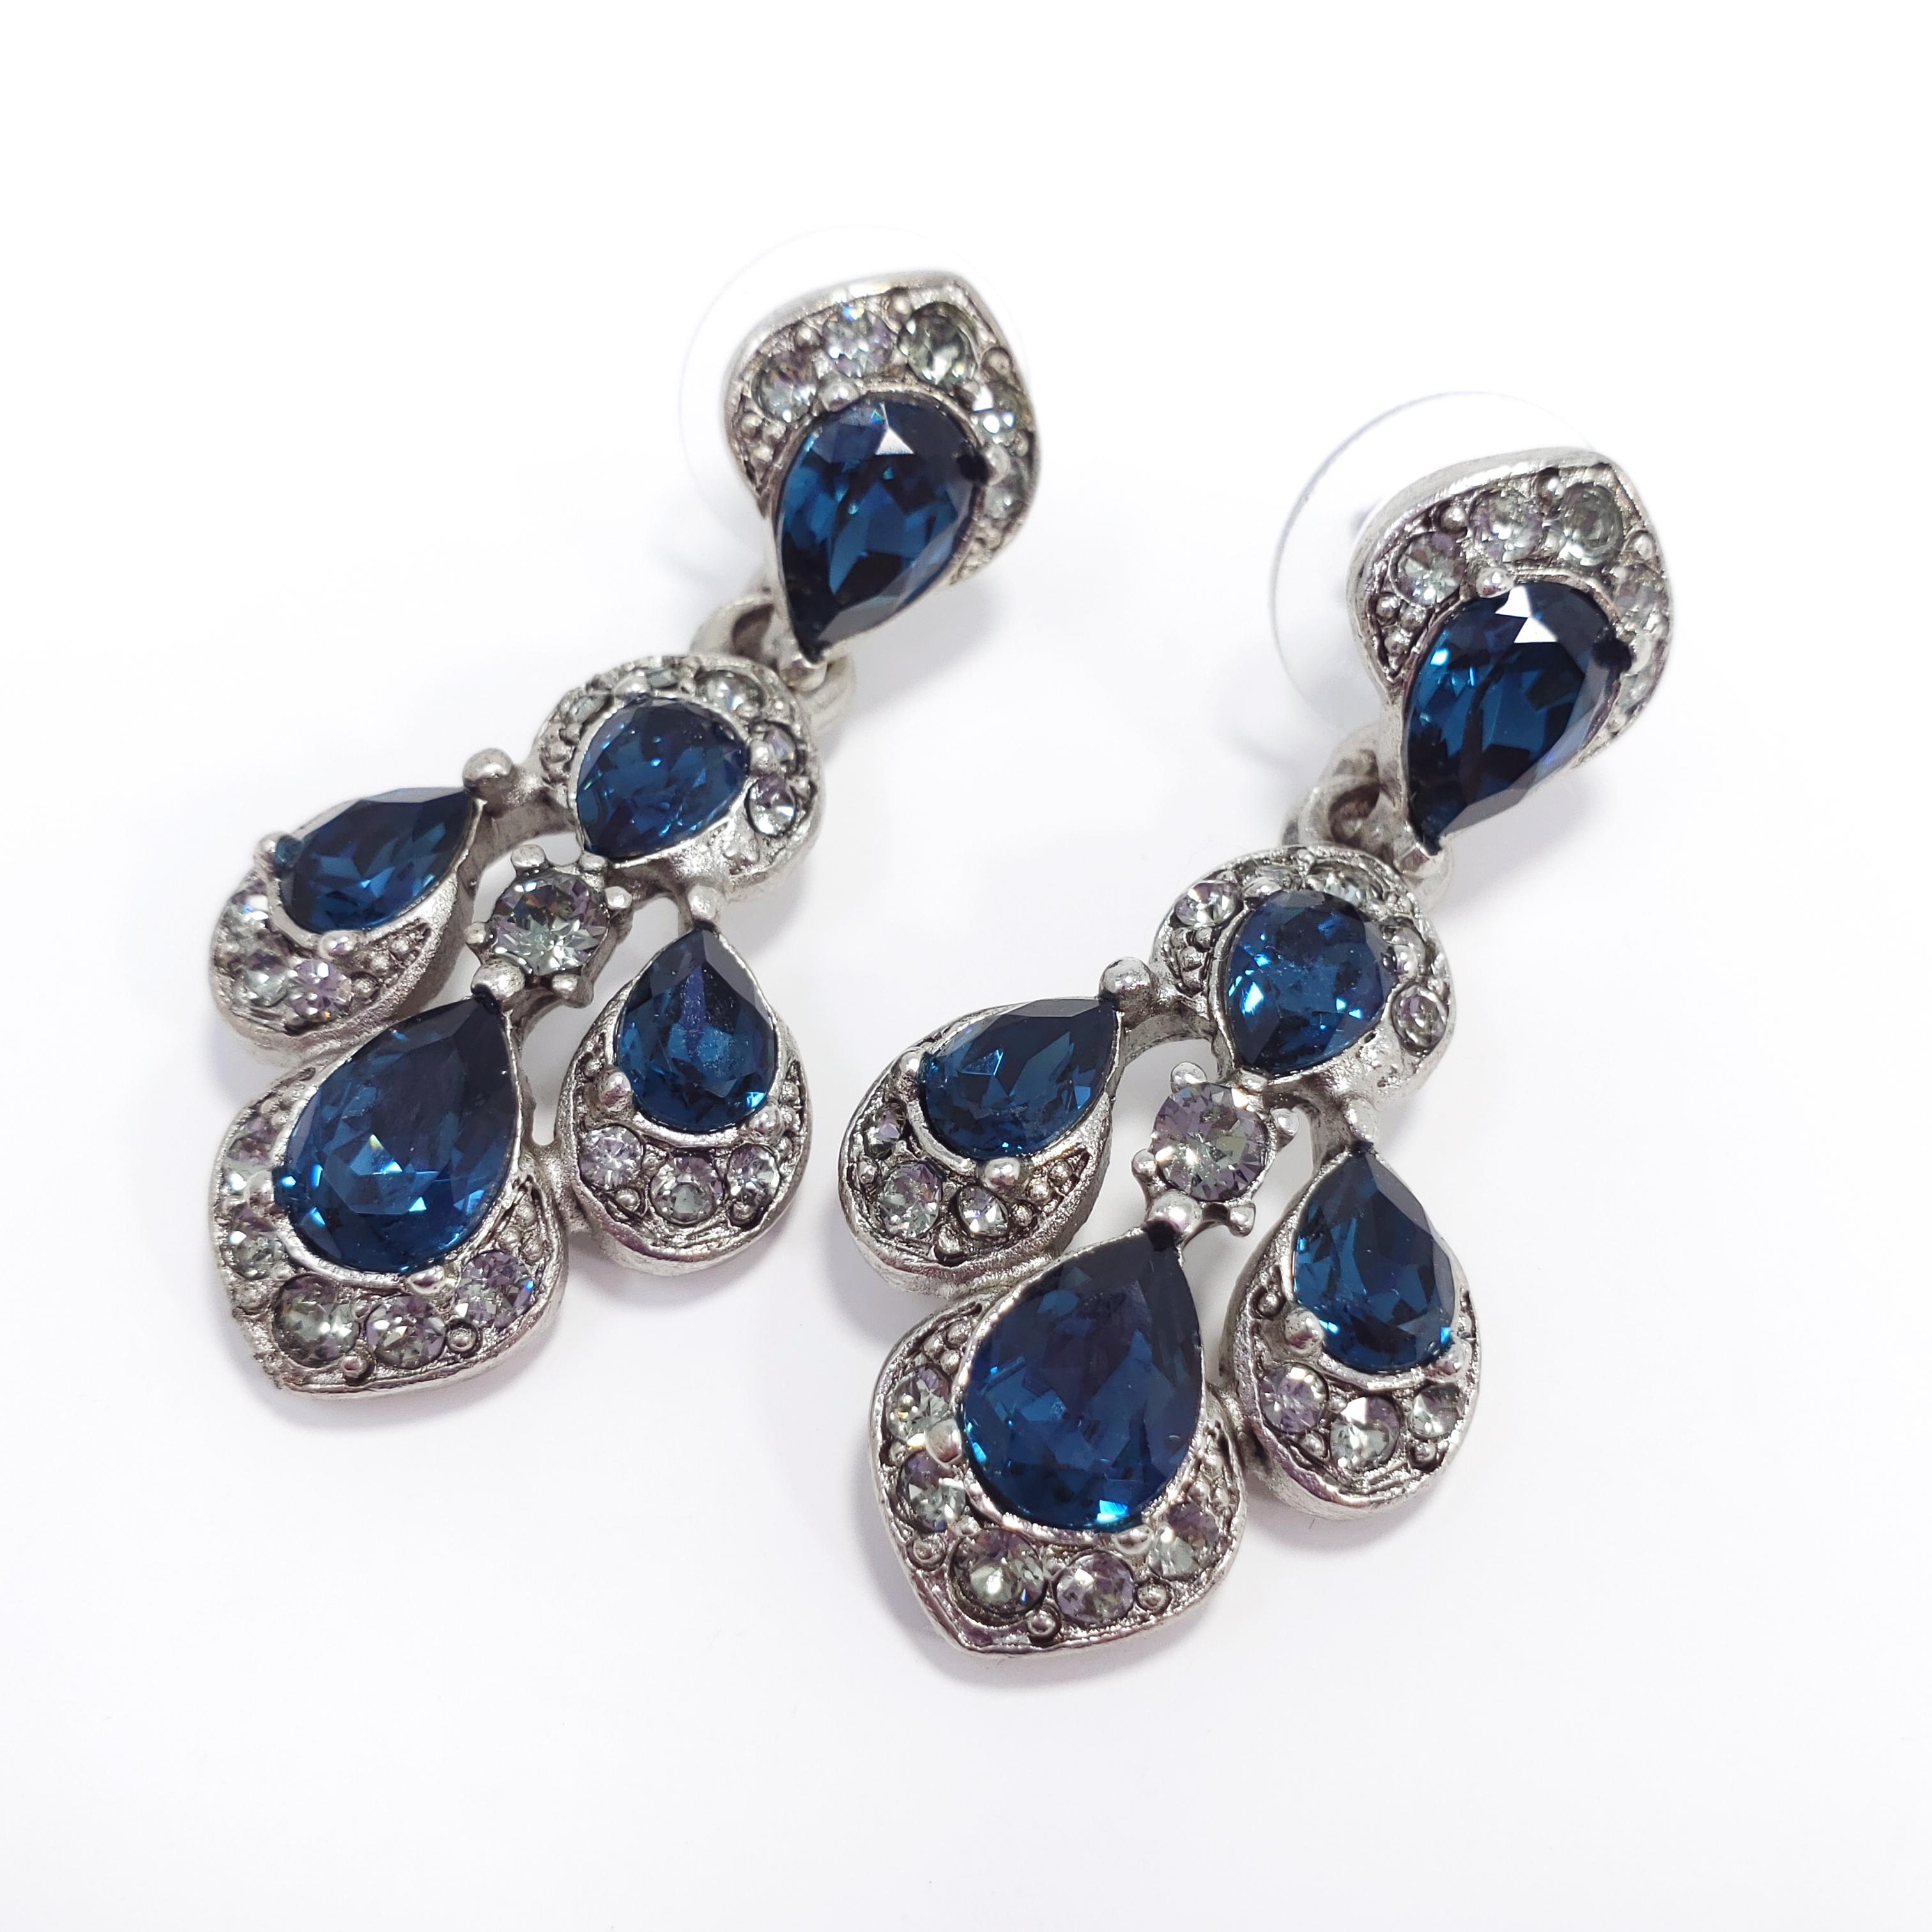 A pair of Oscar de la Renta dangling clip on earrings from the parlor collection. Feature dark blue and gray/clear crystals with centerpiece gray moonglow cabochons. Silvertone setting.

Hallmarks: Oscar de la Renta, Made in USA